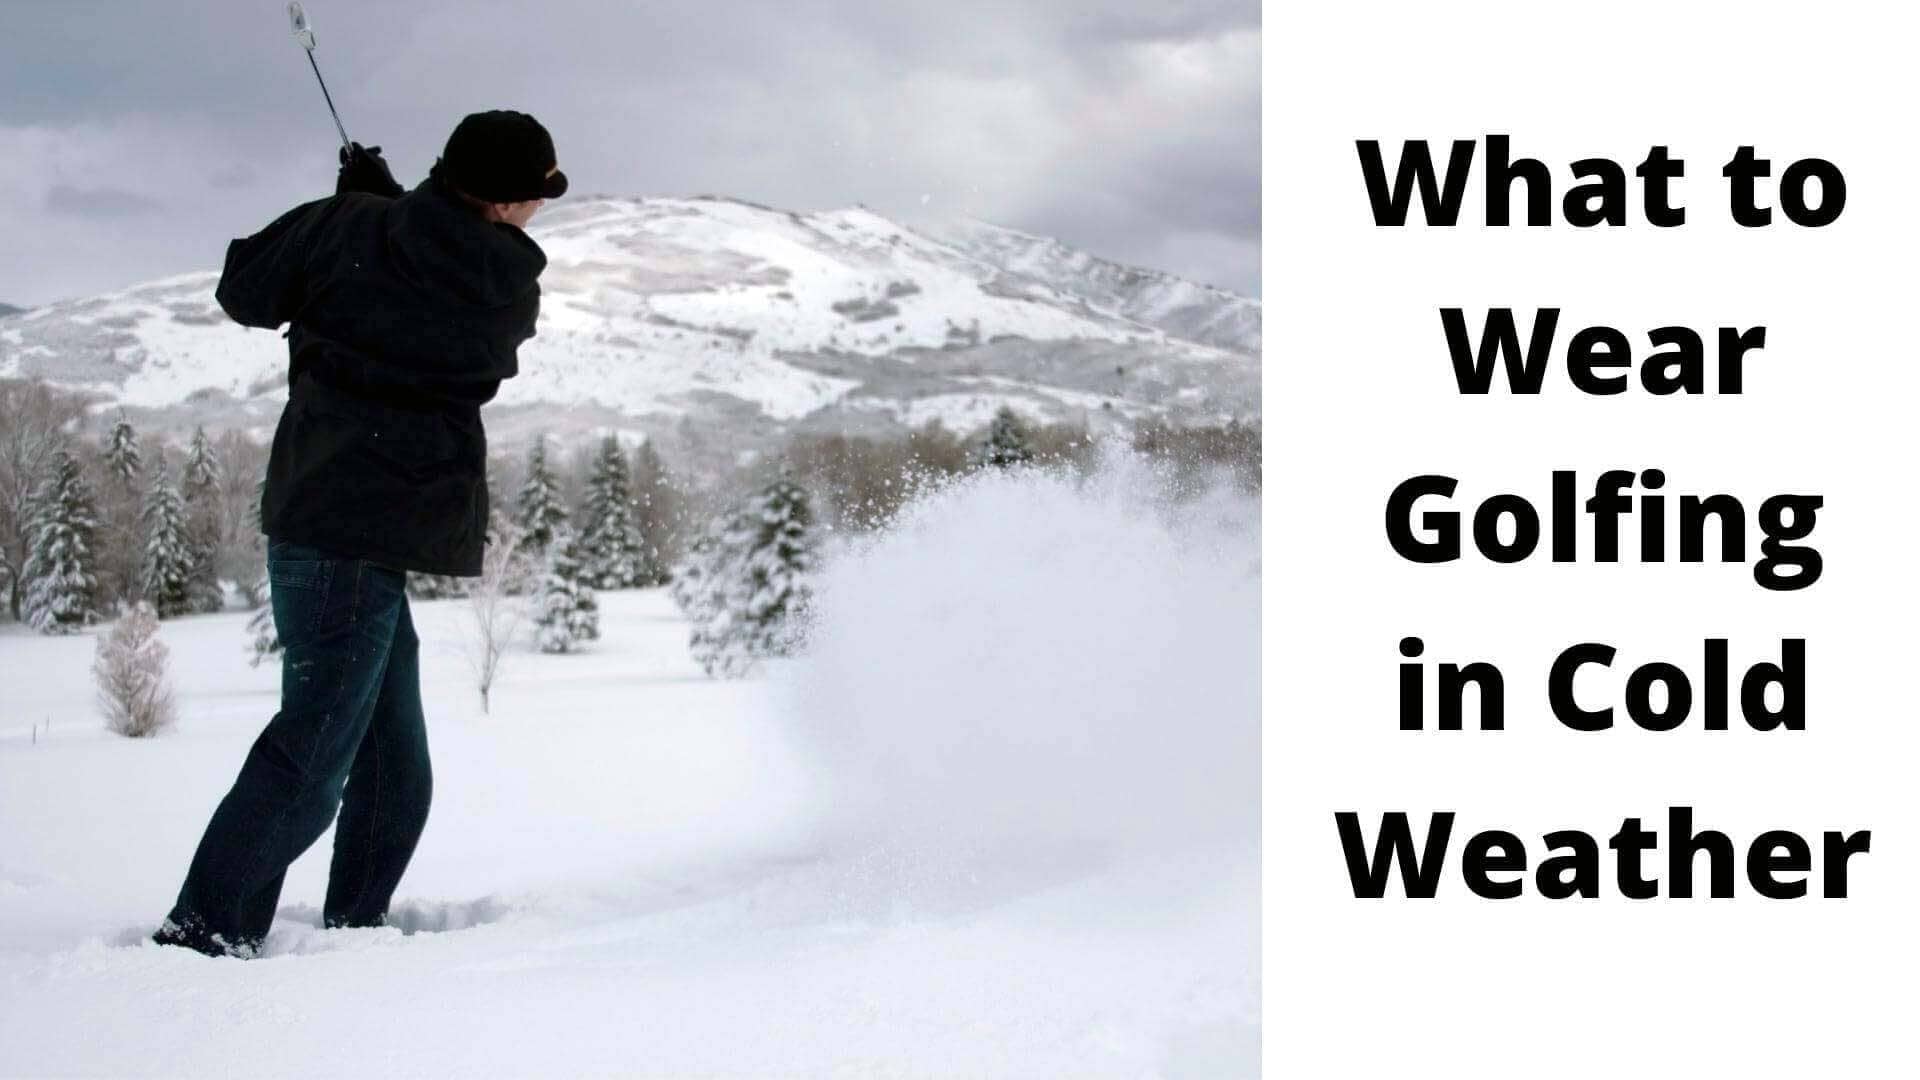 In this Winter Season We Mush Have to Wear Something Special for Protect The Cold Werather.So We Always have a Ques About What to Wear Golfing in Cold Weather ?.This Article is The Solution of This Ques